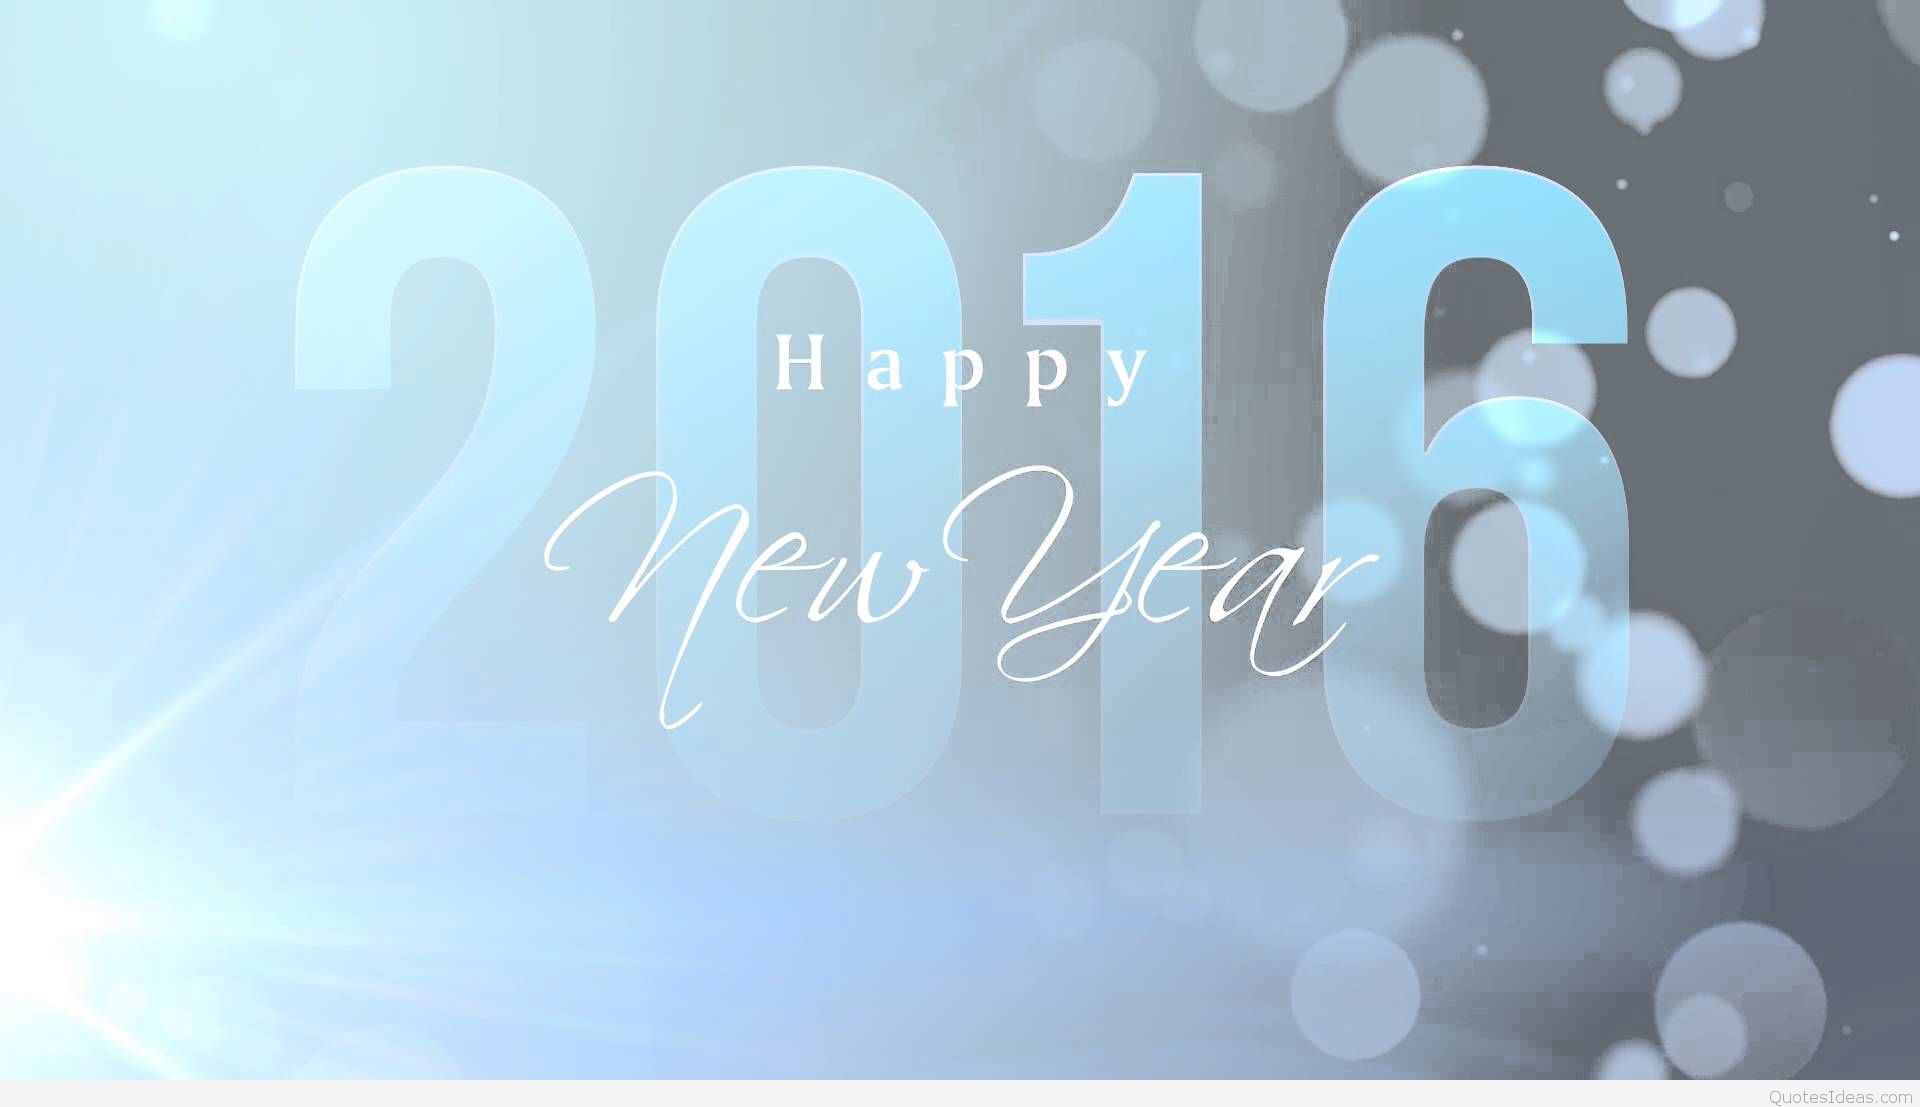 Happy new year photos wallpapers sayings